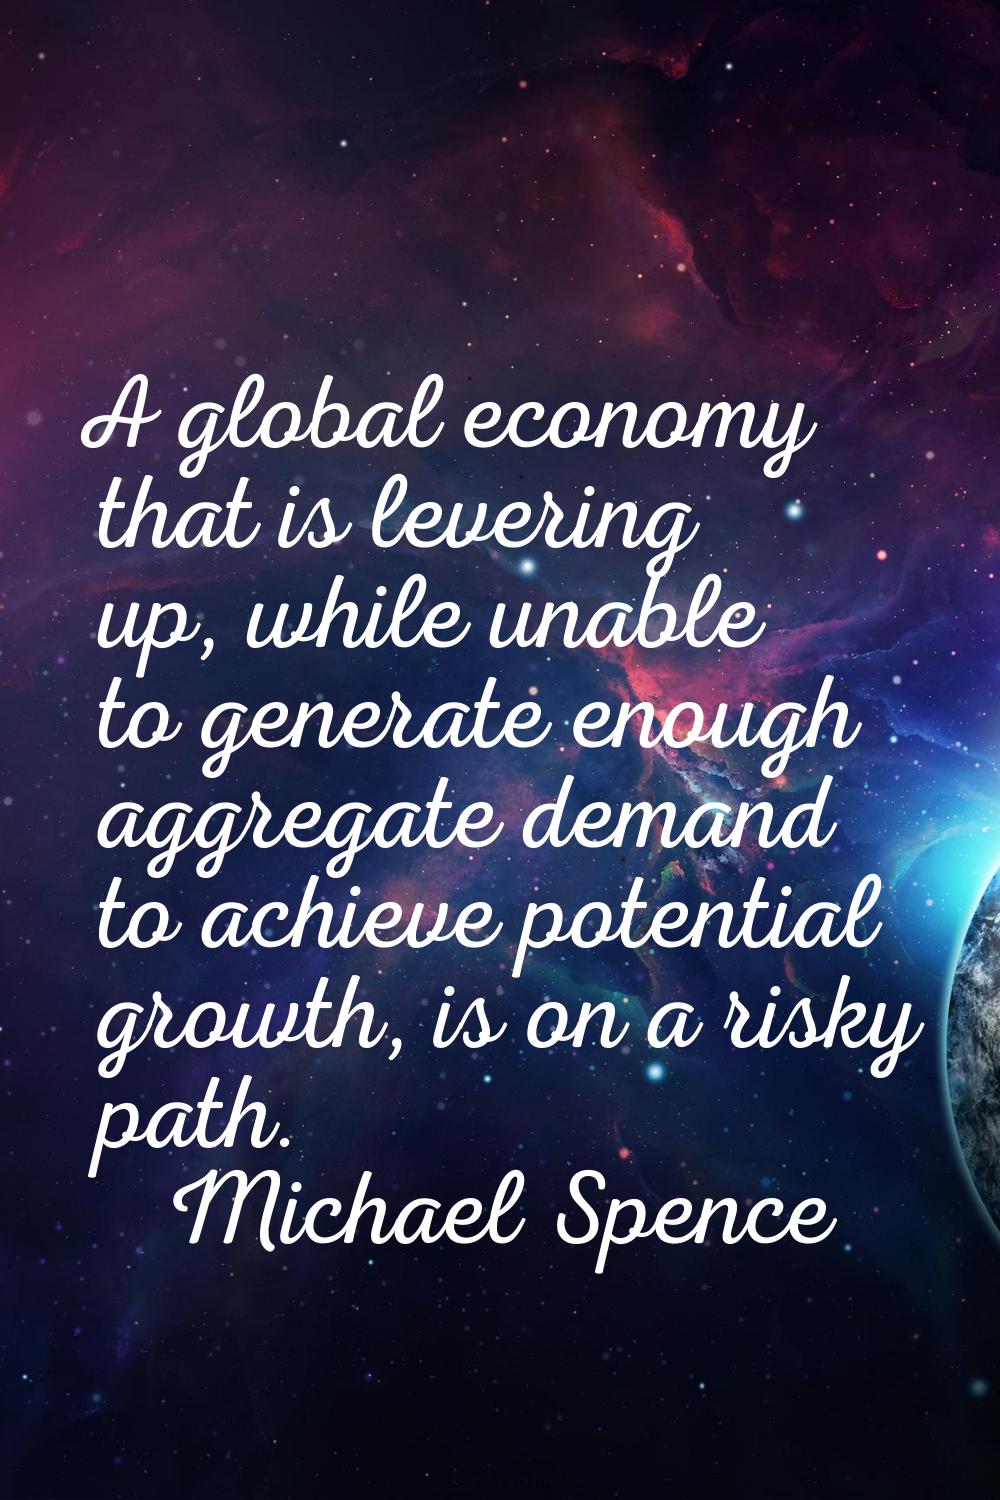 A global economy that is levering up, while unable to generate enough aggregate demand to achieve p